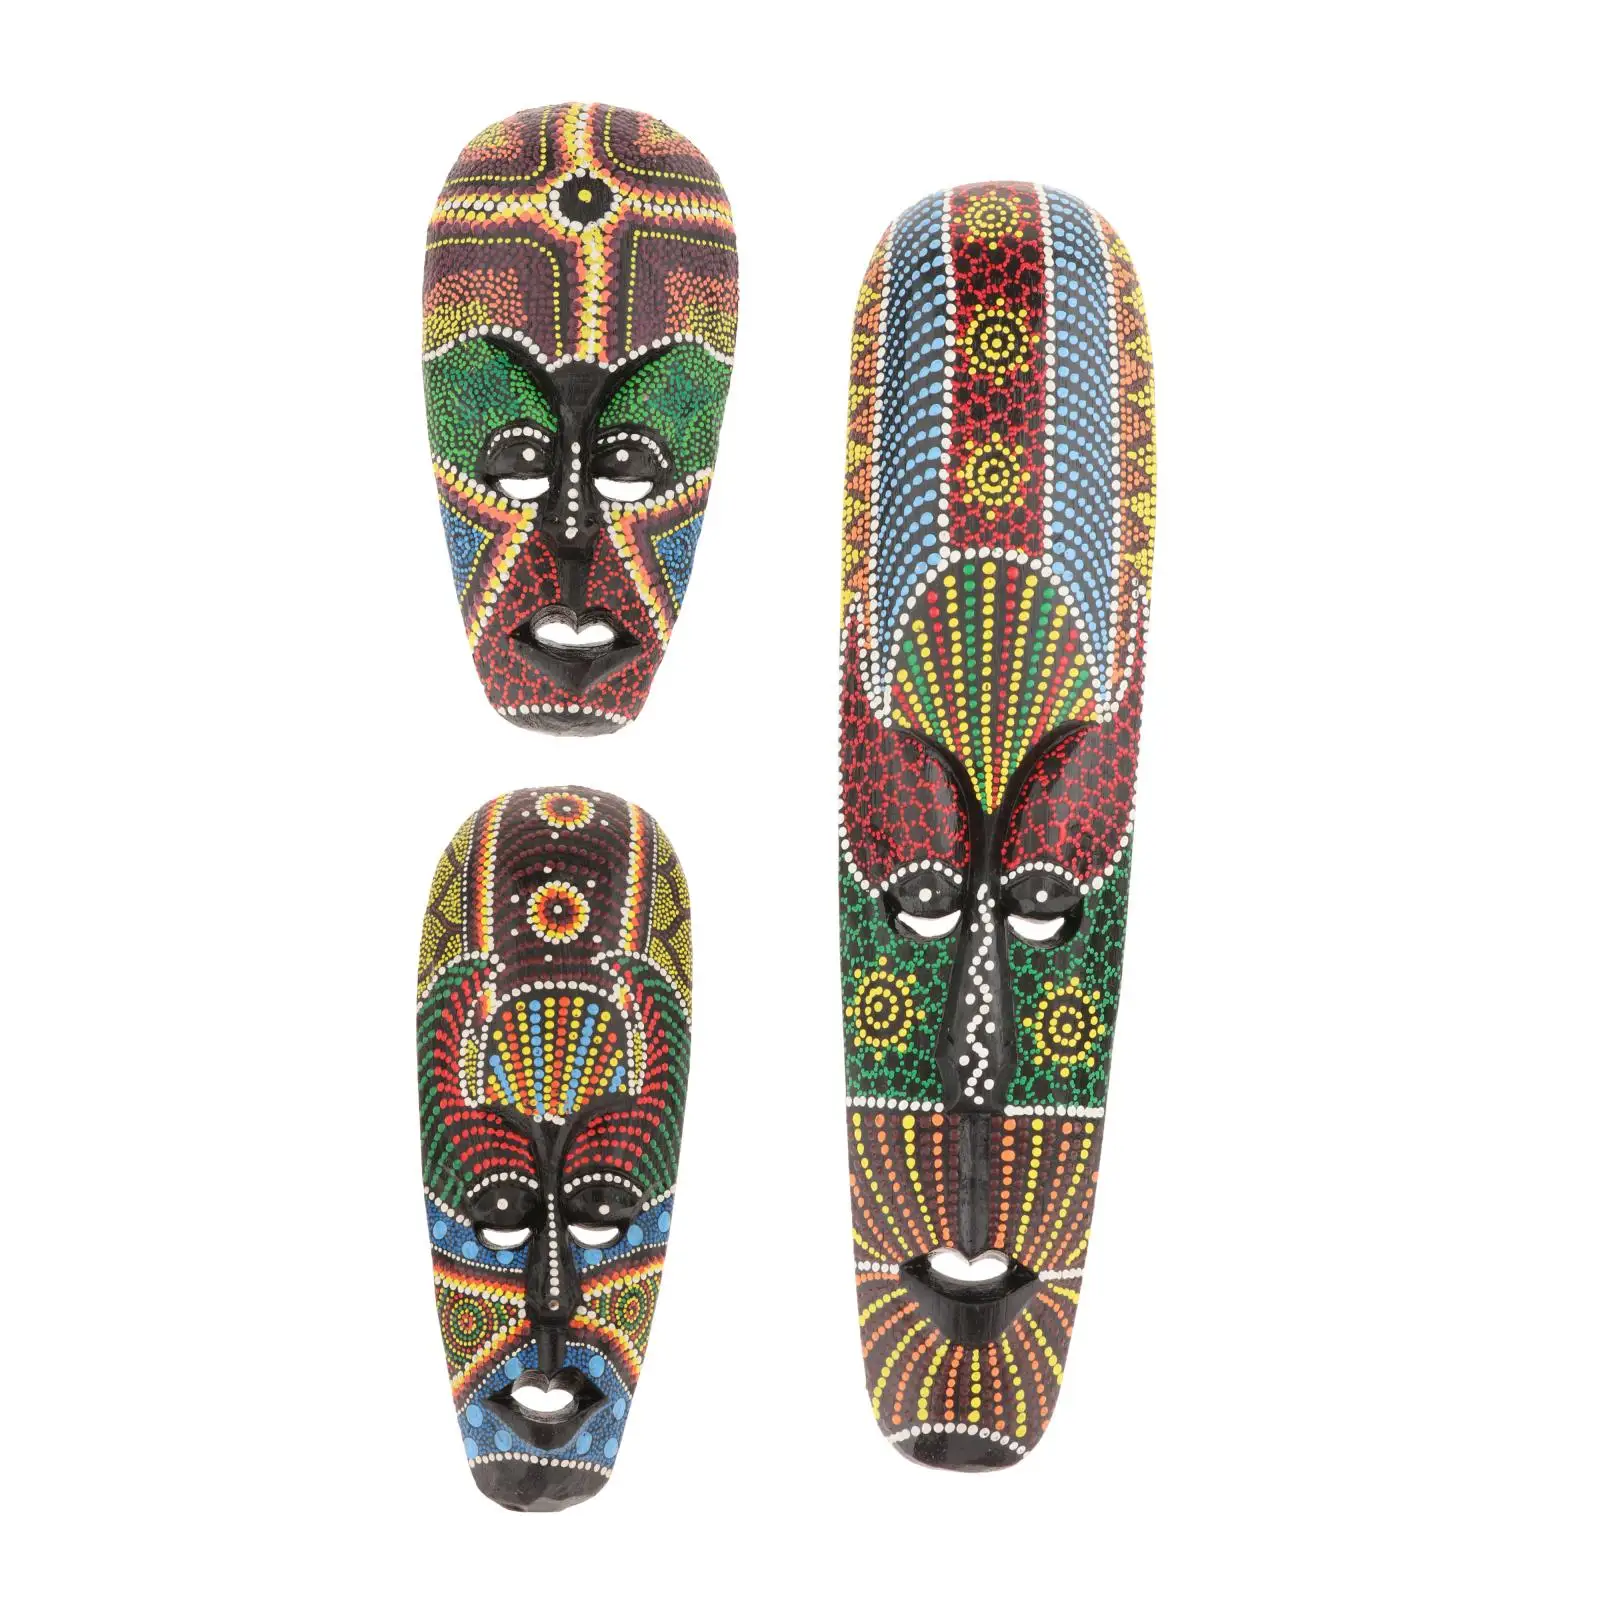 Wooden African Hand Carved Tribal Face Mask Painting Wall Hanging Folk Art